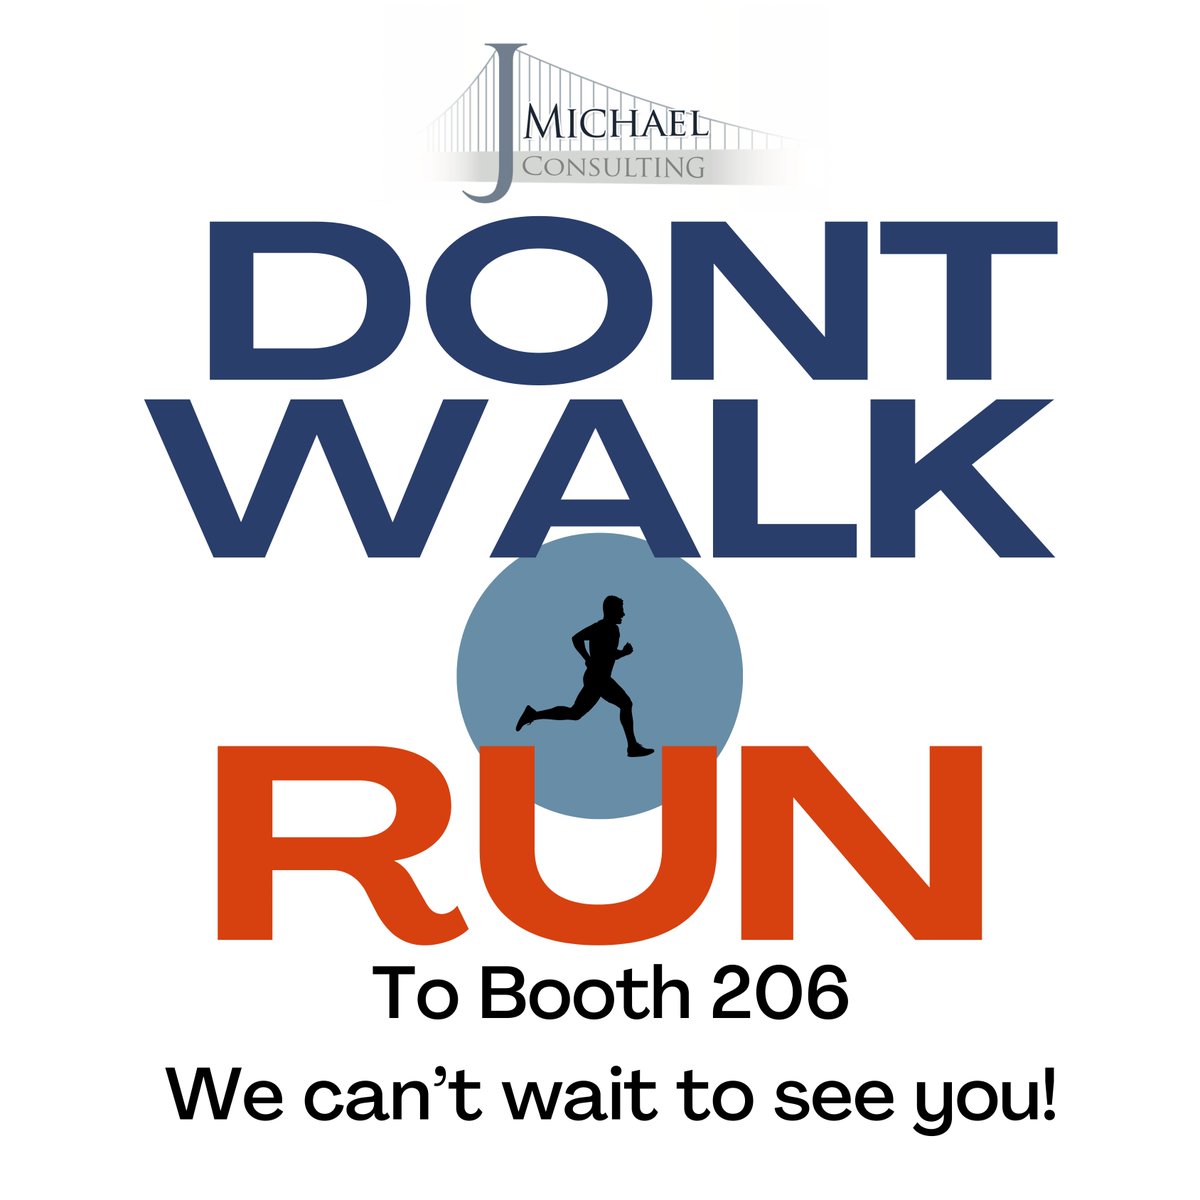 Don’t walk, run to Booth 206 at the APHL Annual Meeting for an exclusive look at JMC’s innovative solutions tailored for public health laboratories.
 Booth 206
#APHL #PublicHealth #Informatics #JMichaelConsulting #JMC #APHL2024